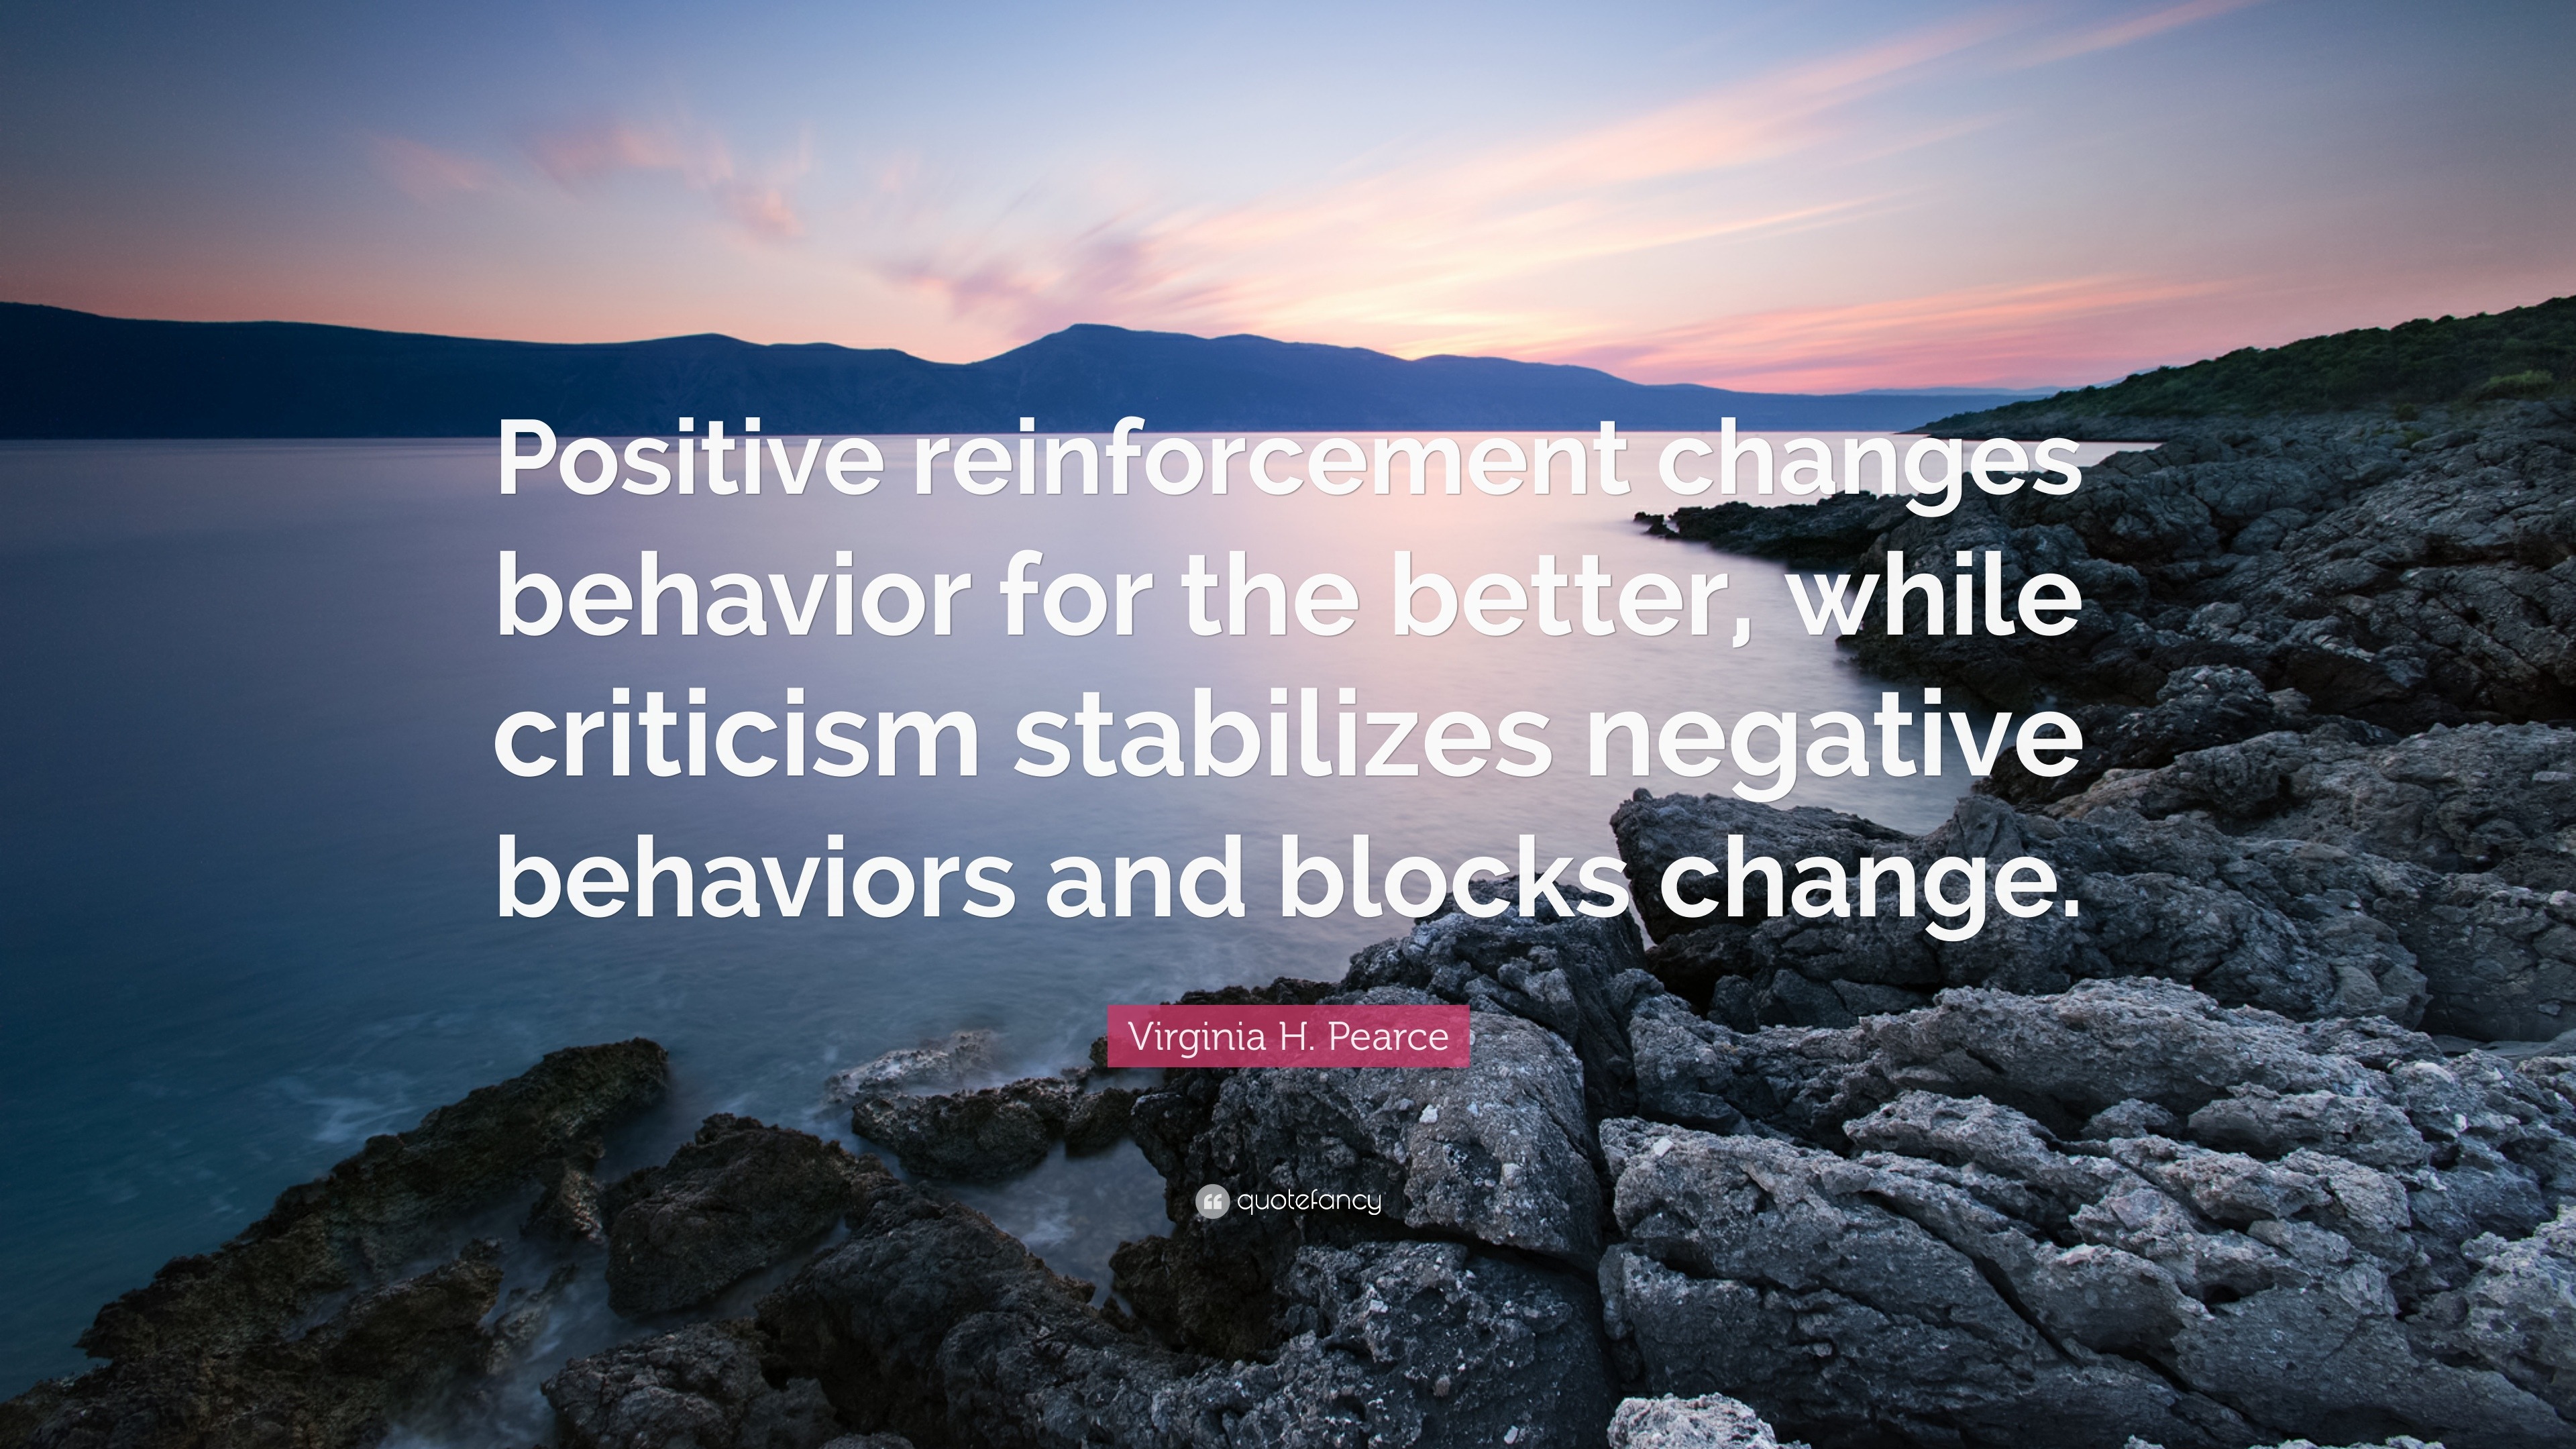 Virginia H. Pearce Quote: “Positive reinforcement changes behavior for